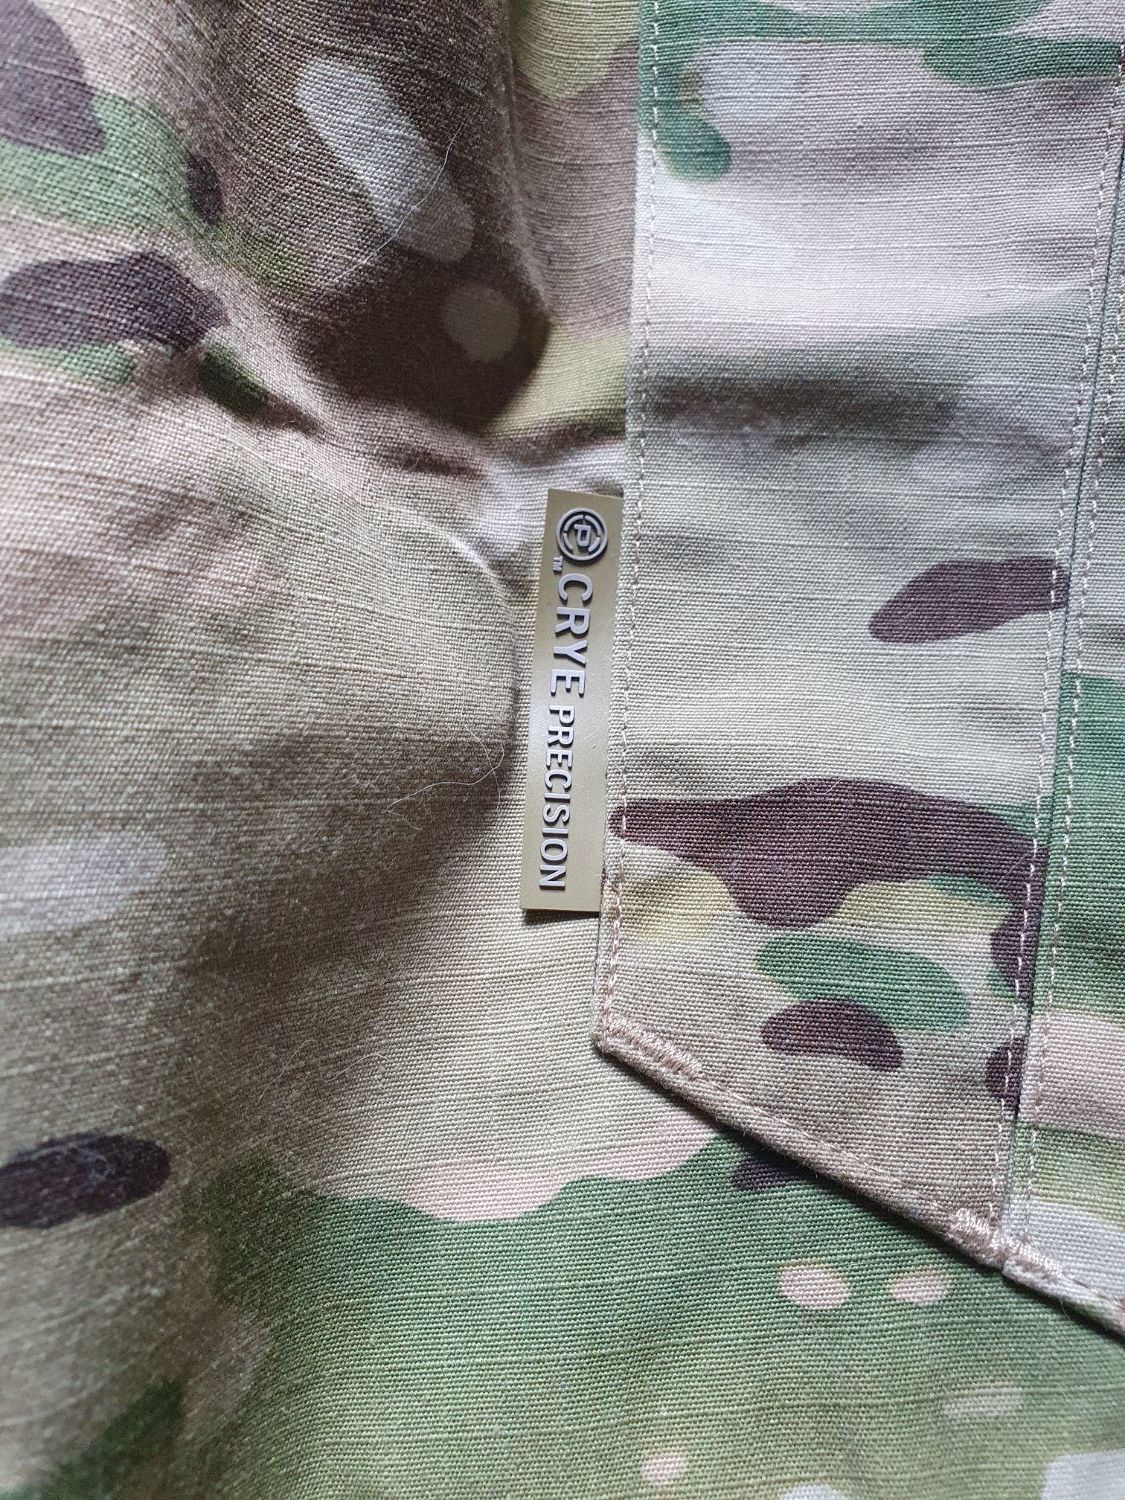 Crye Precision AC UKSF Multicam Combat Pants 36R - Gear - Airsoft Forums UK